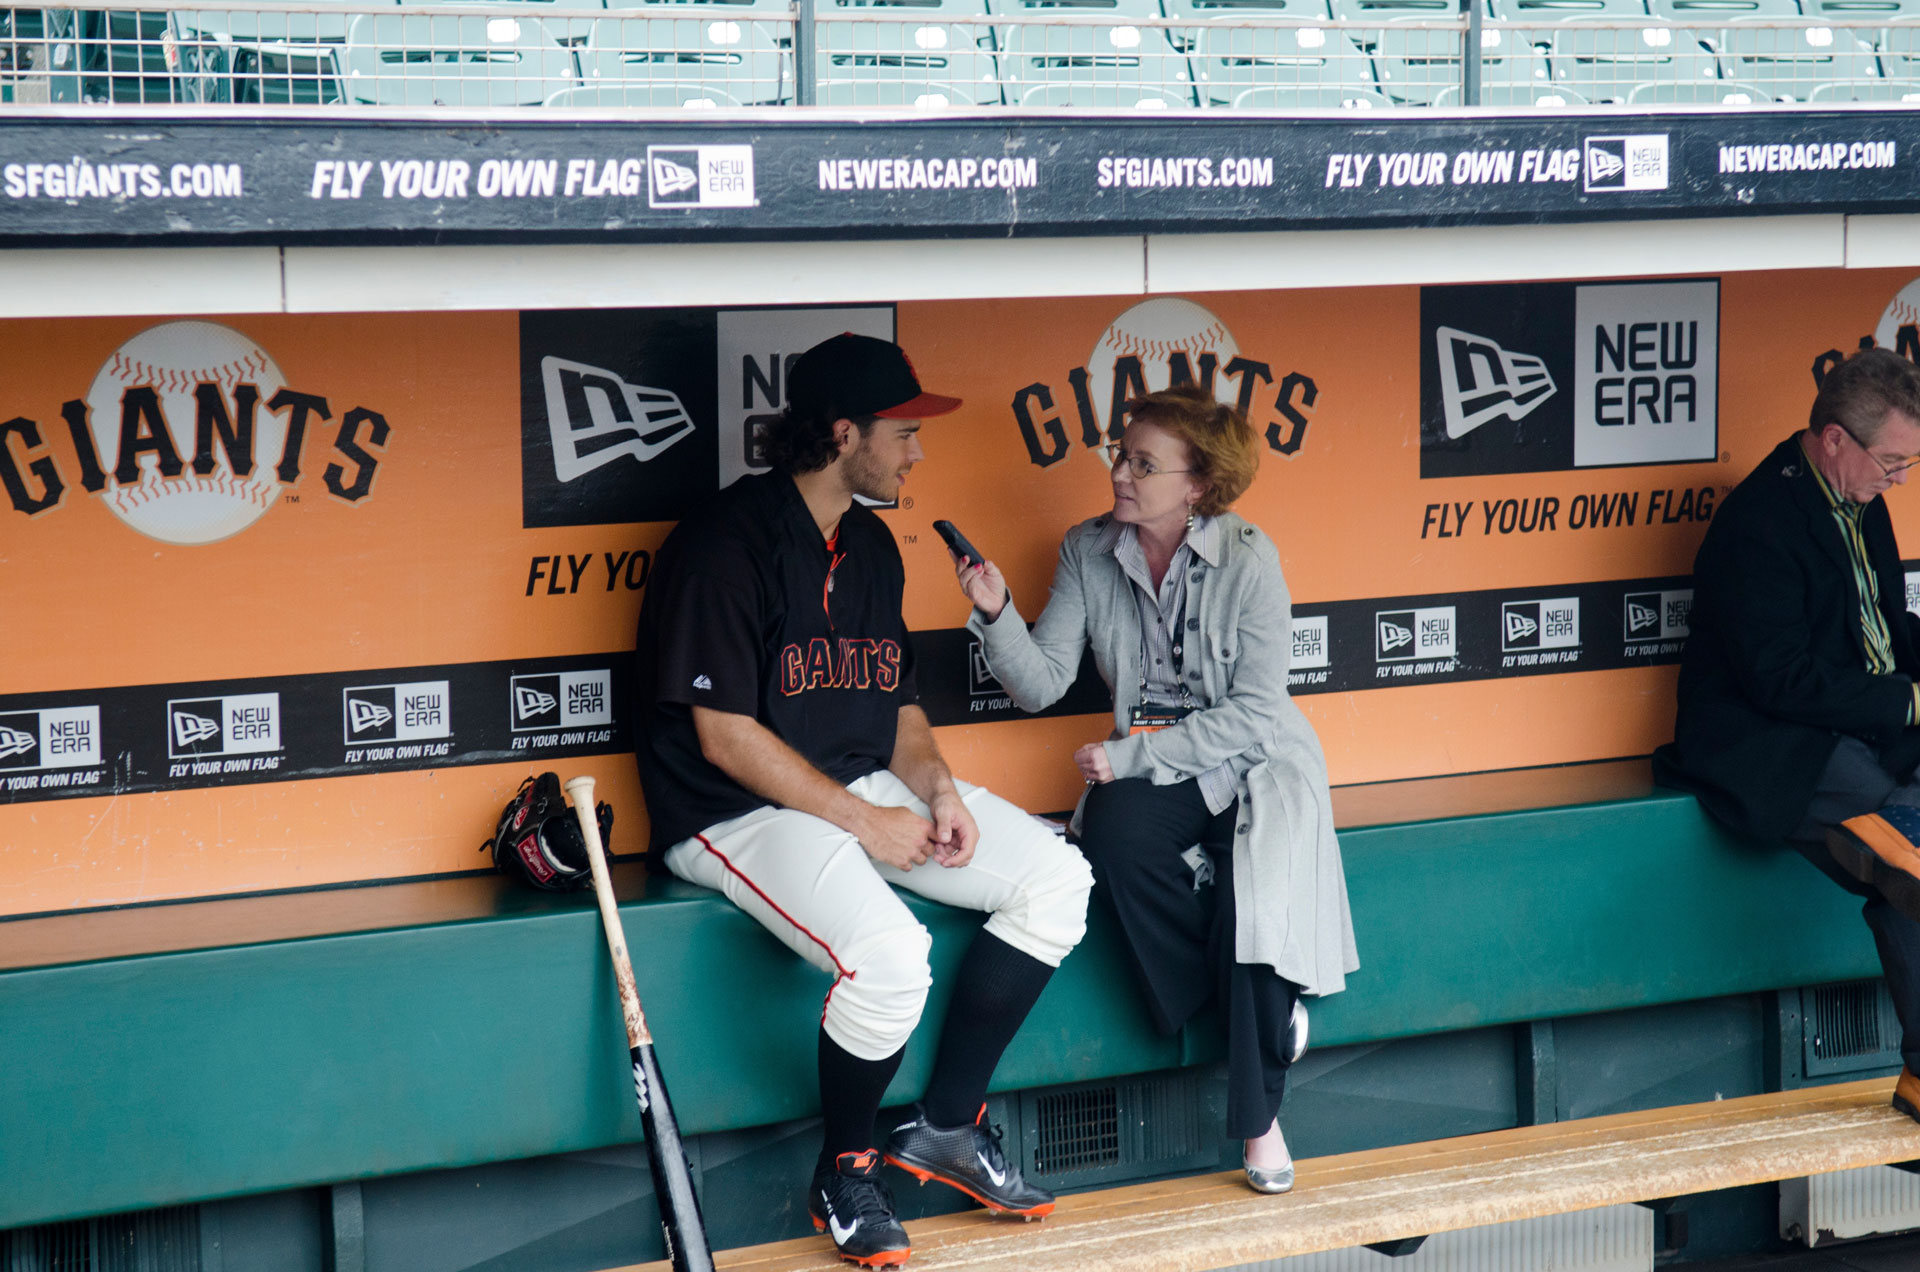 A woman interviews a San Francisco Giants baseball player in the dugout.